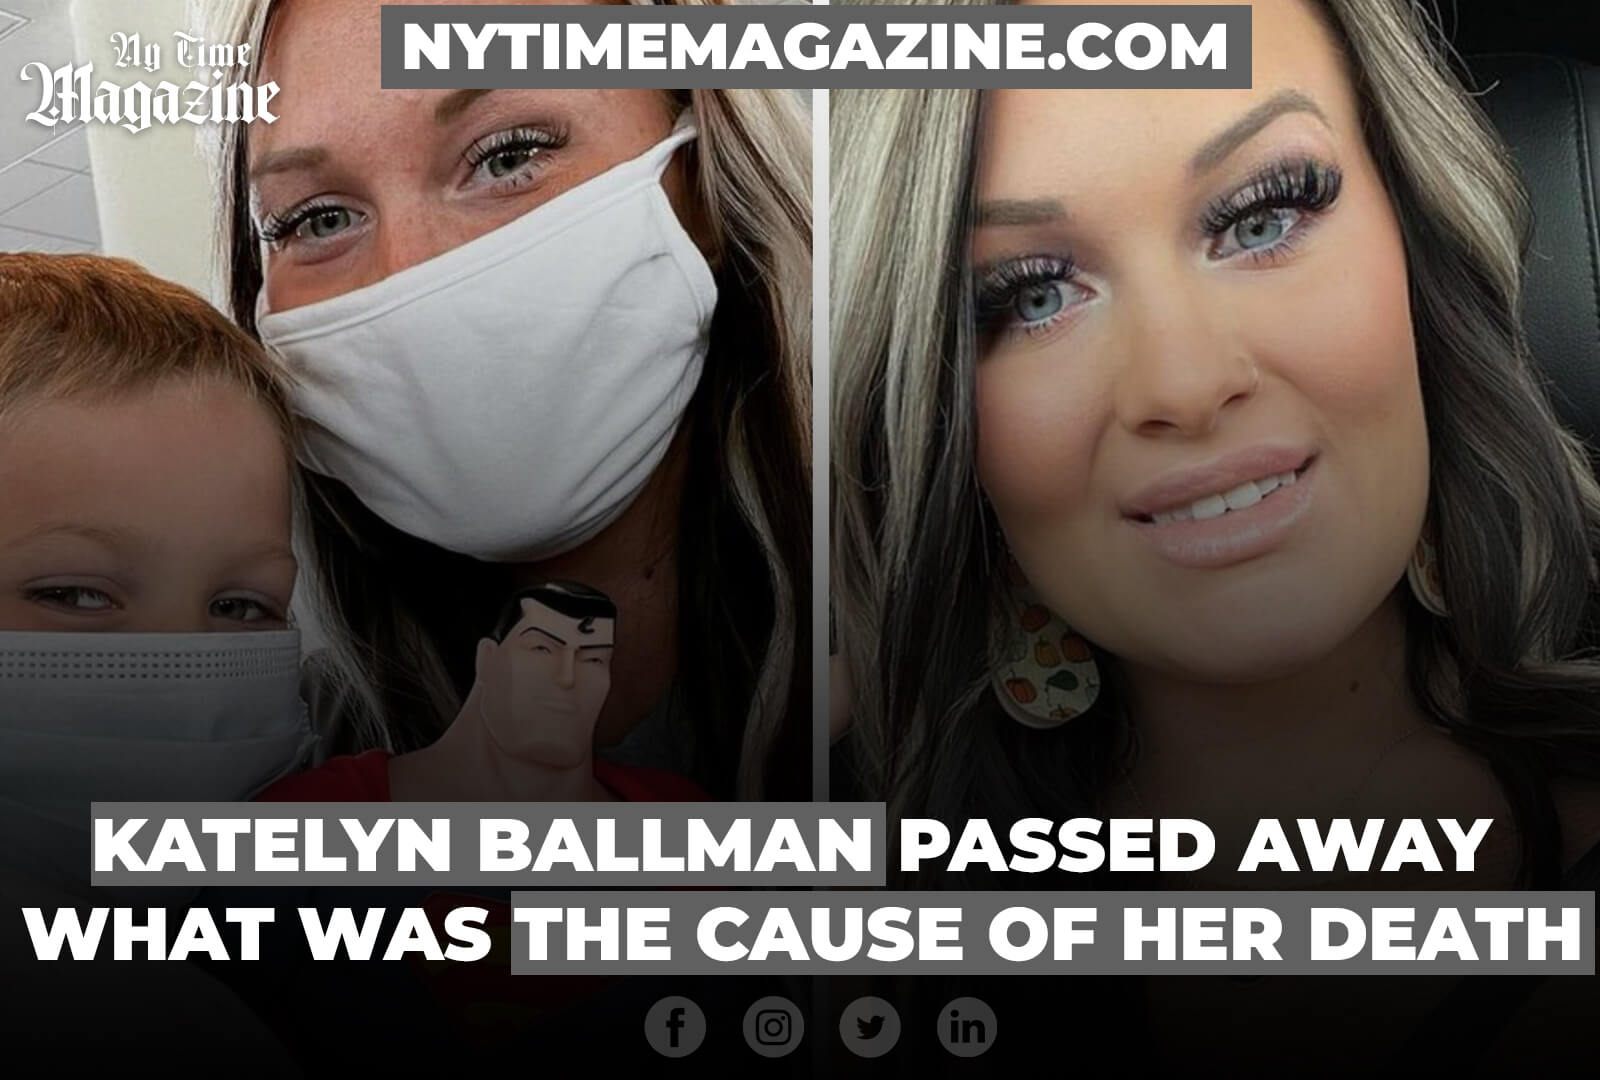 KATELYN BALLMAN PASSED AWAY – WHAT WAS THE CAUSE OF HER DEATH?